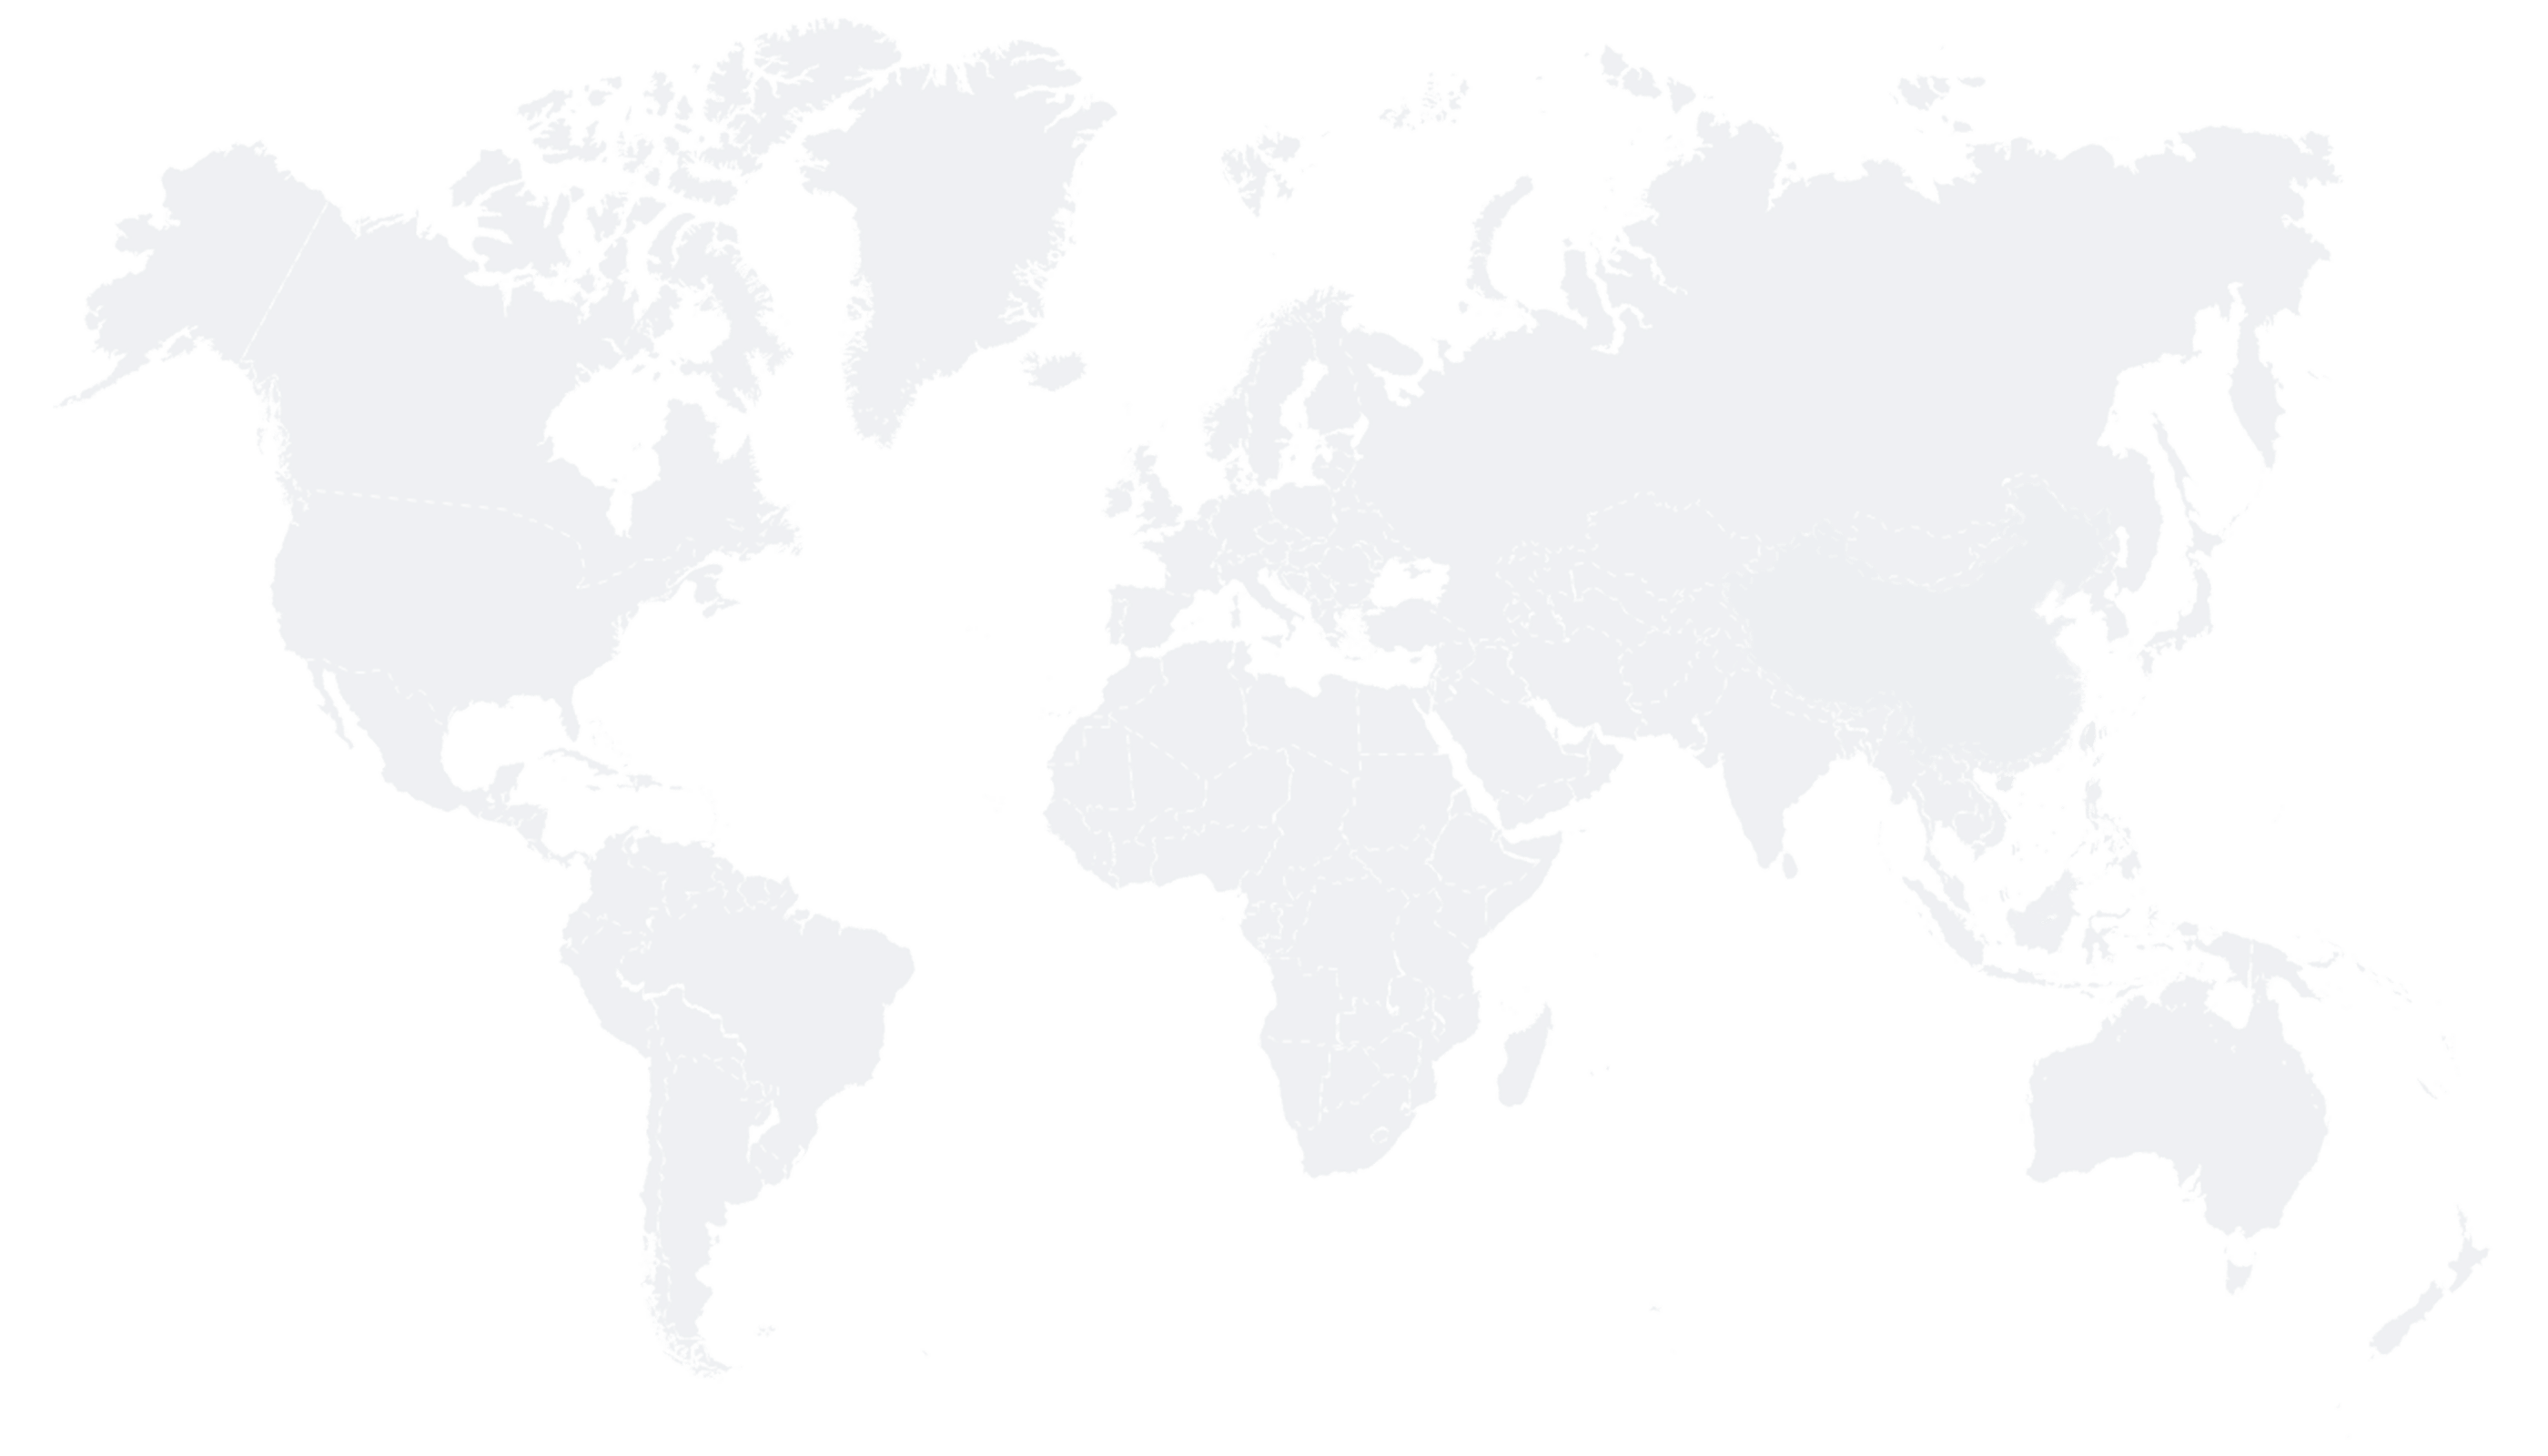 Gray and white world map showing all continents with country borders emphasized.